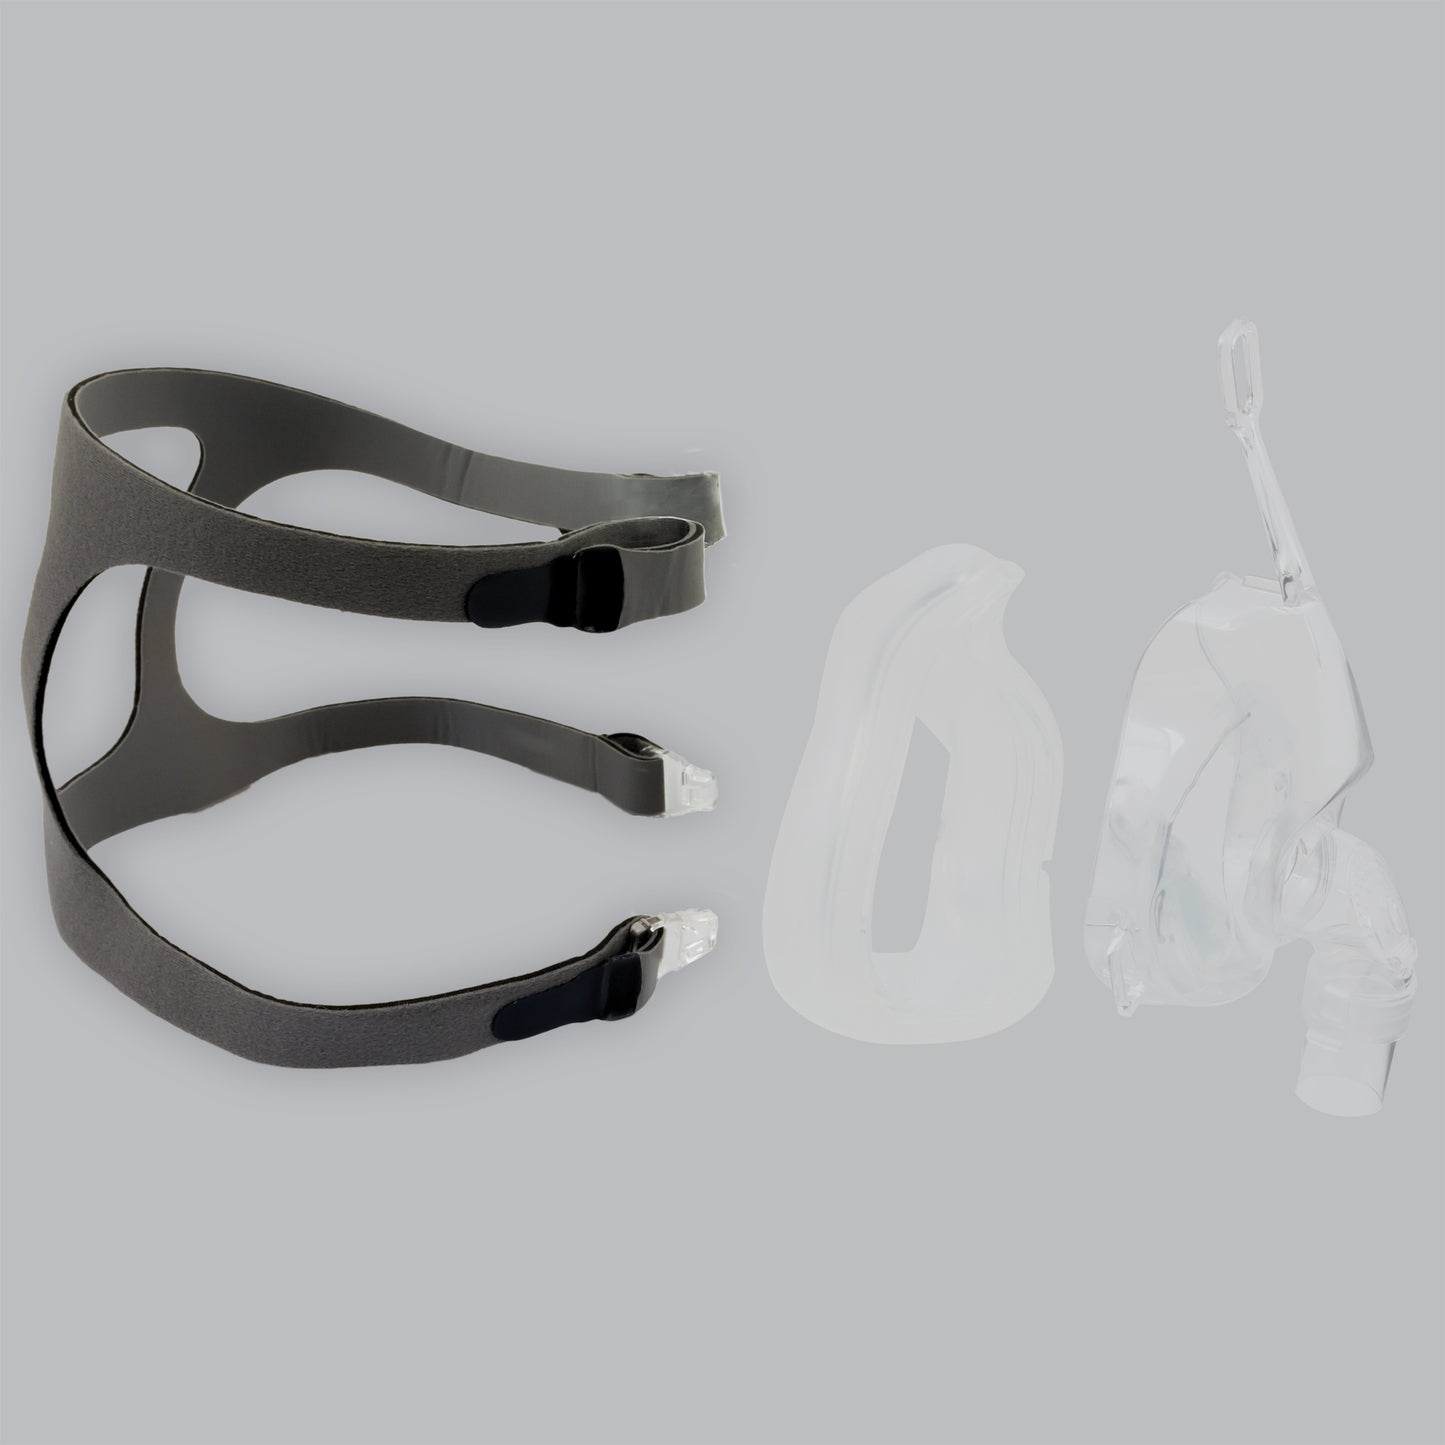 DreamEasy 2 Full Face Replacement Headgear, Gray